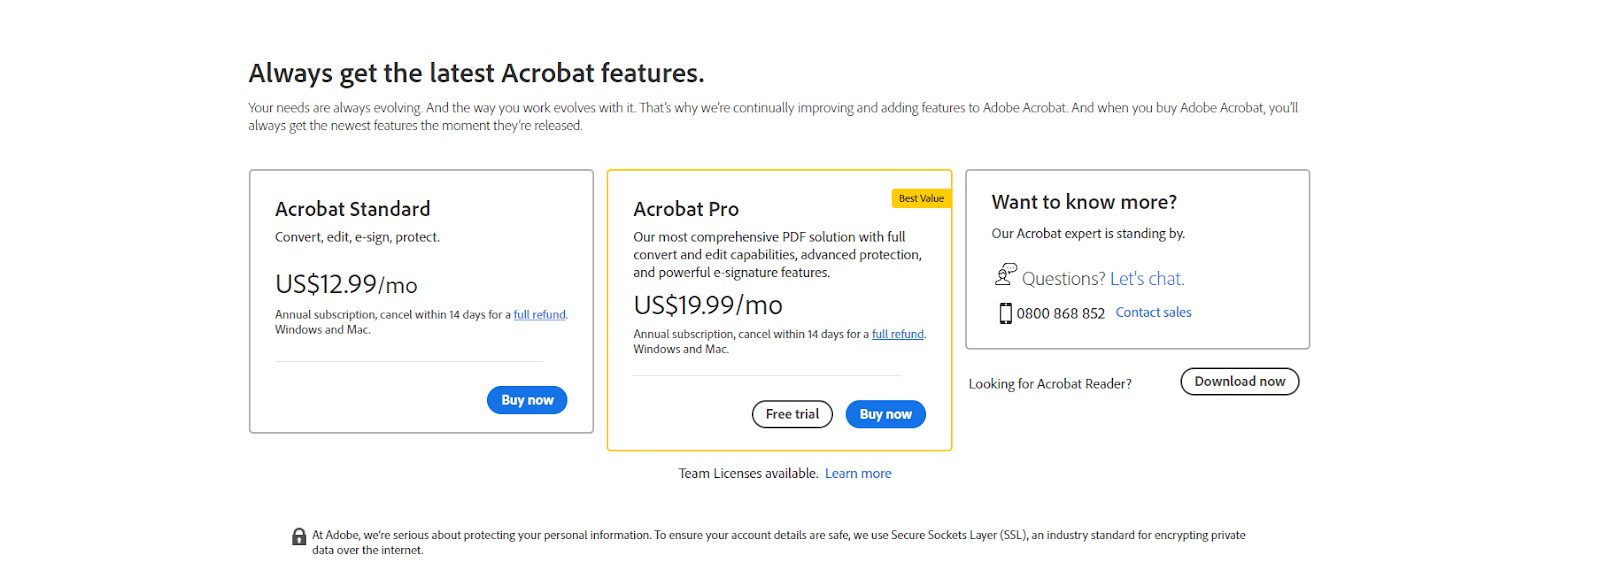 The price of Adobe Acrobat application for both Standard and Pro versions